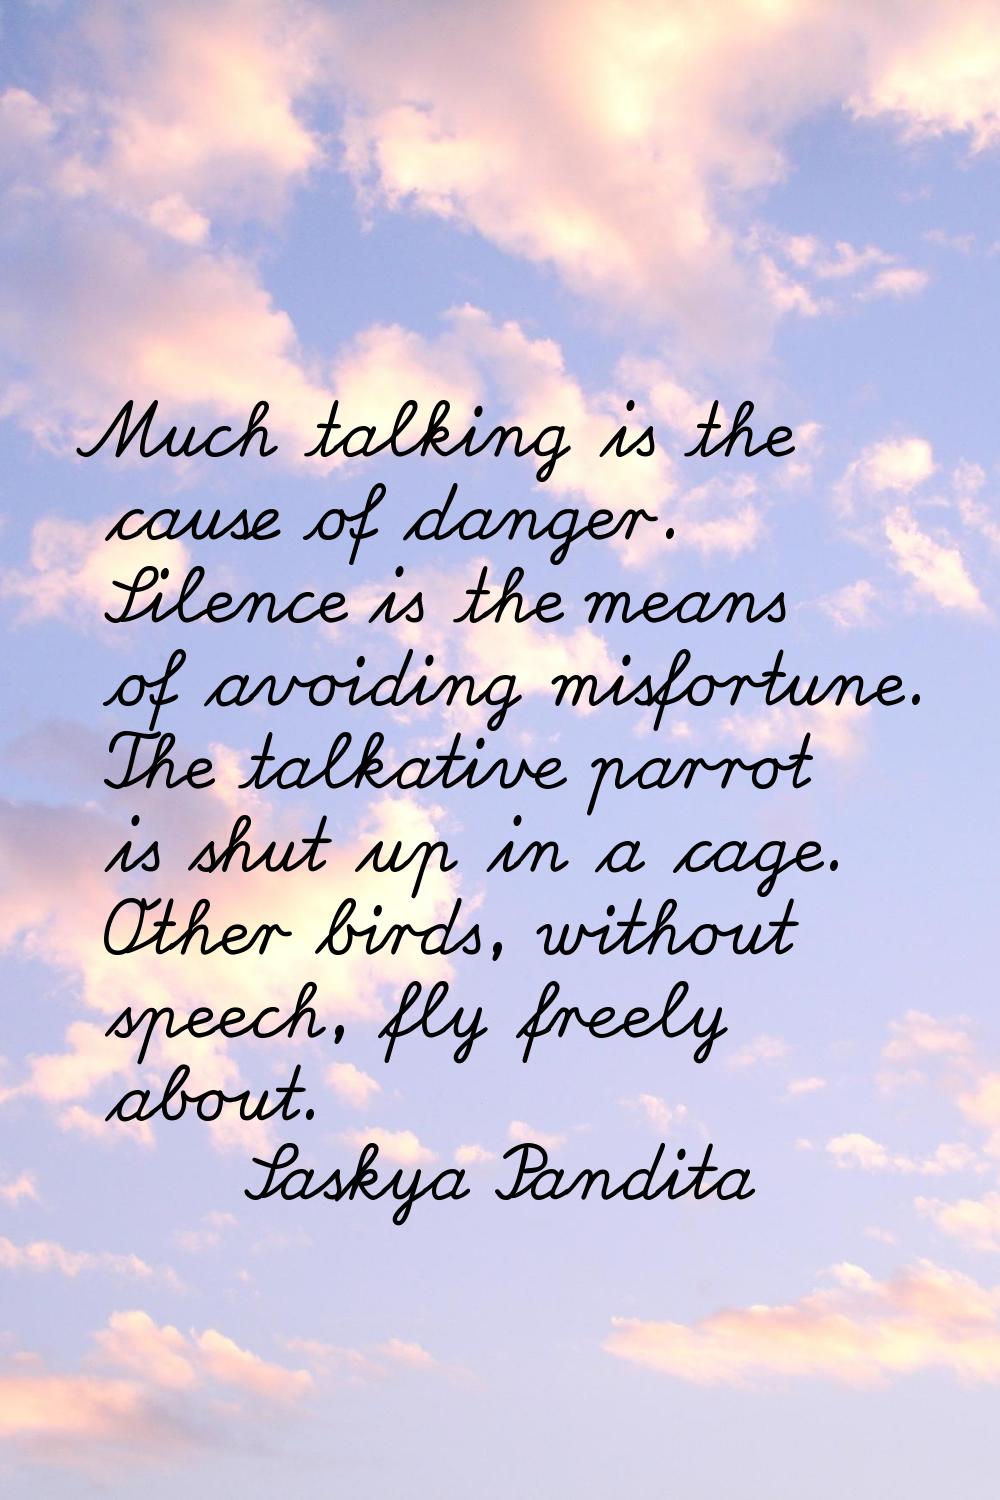 Much talking is the cause of danger. Silence is the means of avoiding misfortune. The talkative par